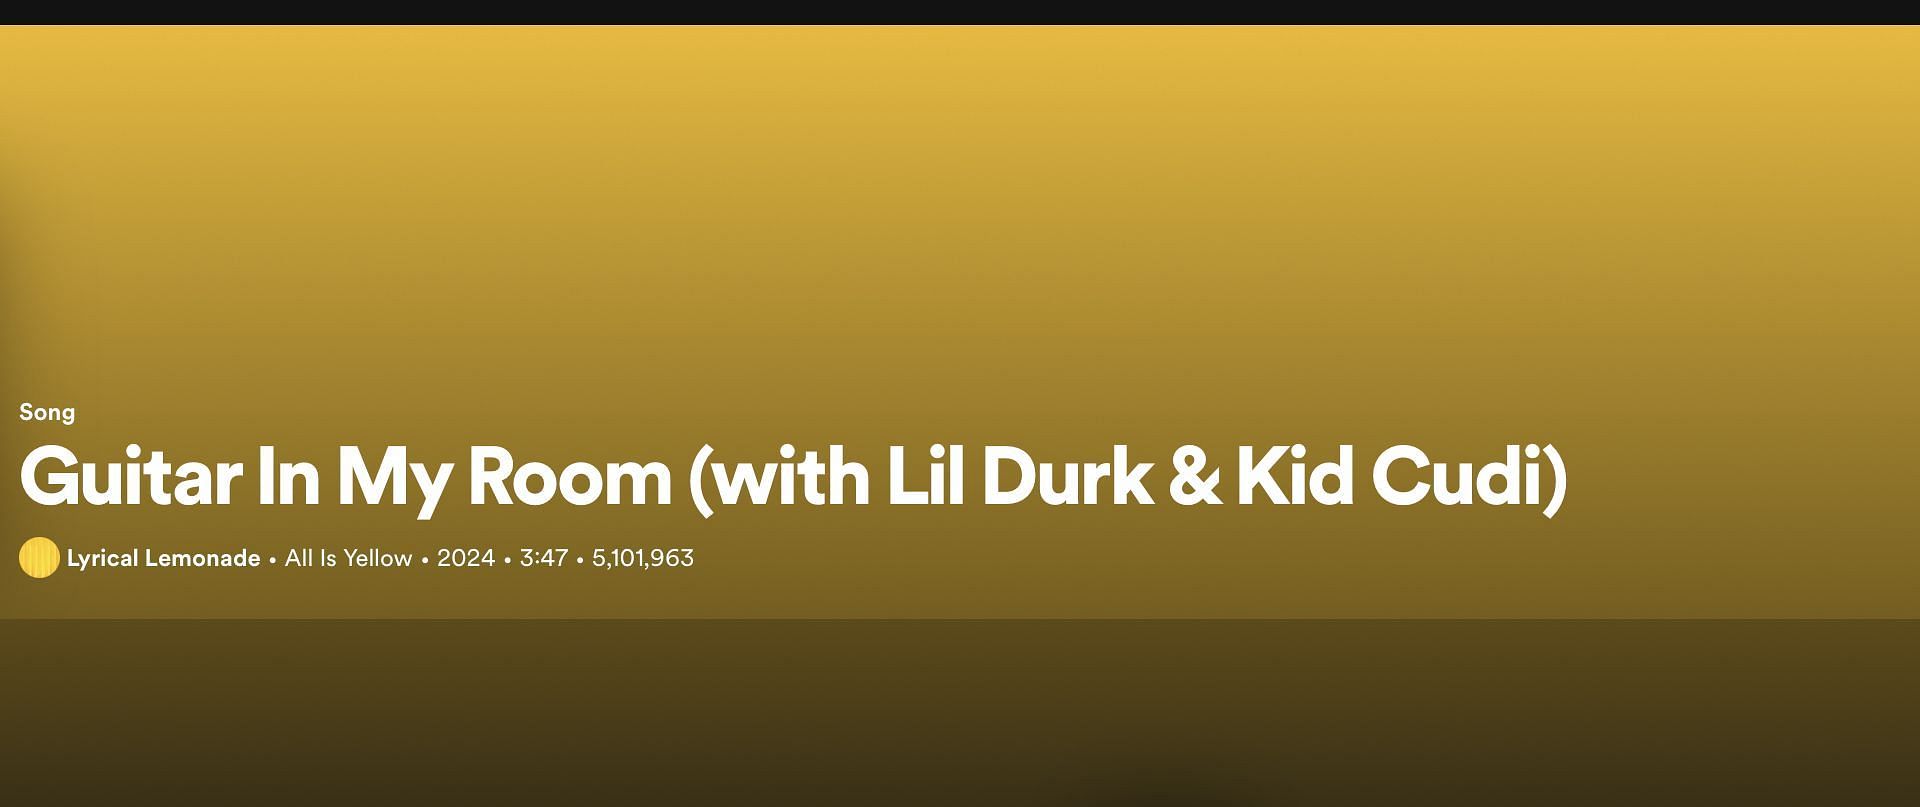 Track 2 from Lyrical Lemonade&#039;s All Is Yellow (Image via Spotify)